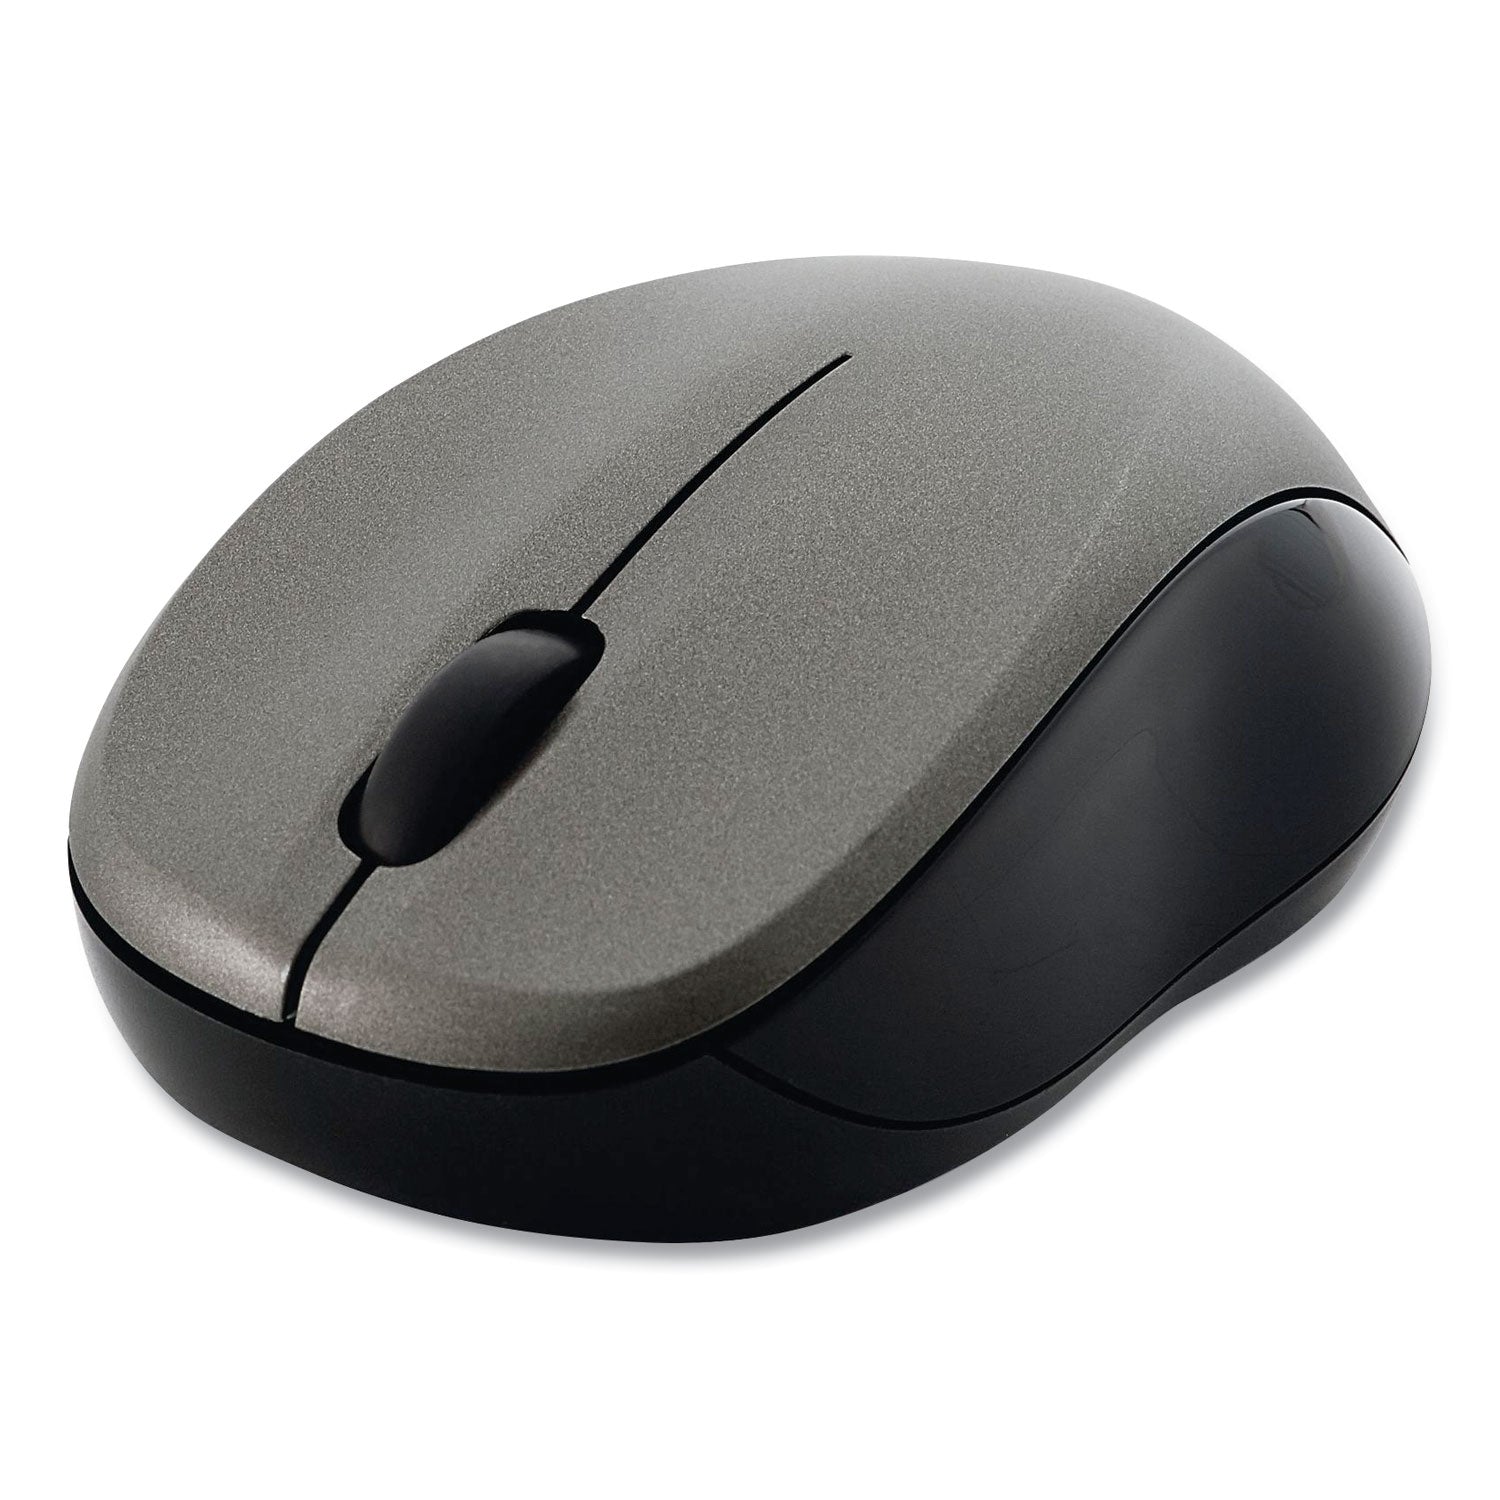 silent-wireless-blue-led-mouse-24-ghz-frequency-328-ft-wireless-range-left-right-hand-use-graphite_ver99769 - 1